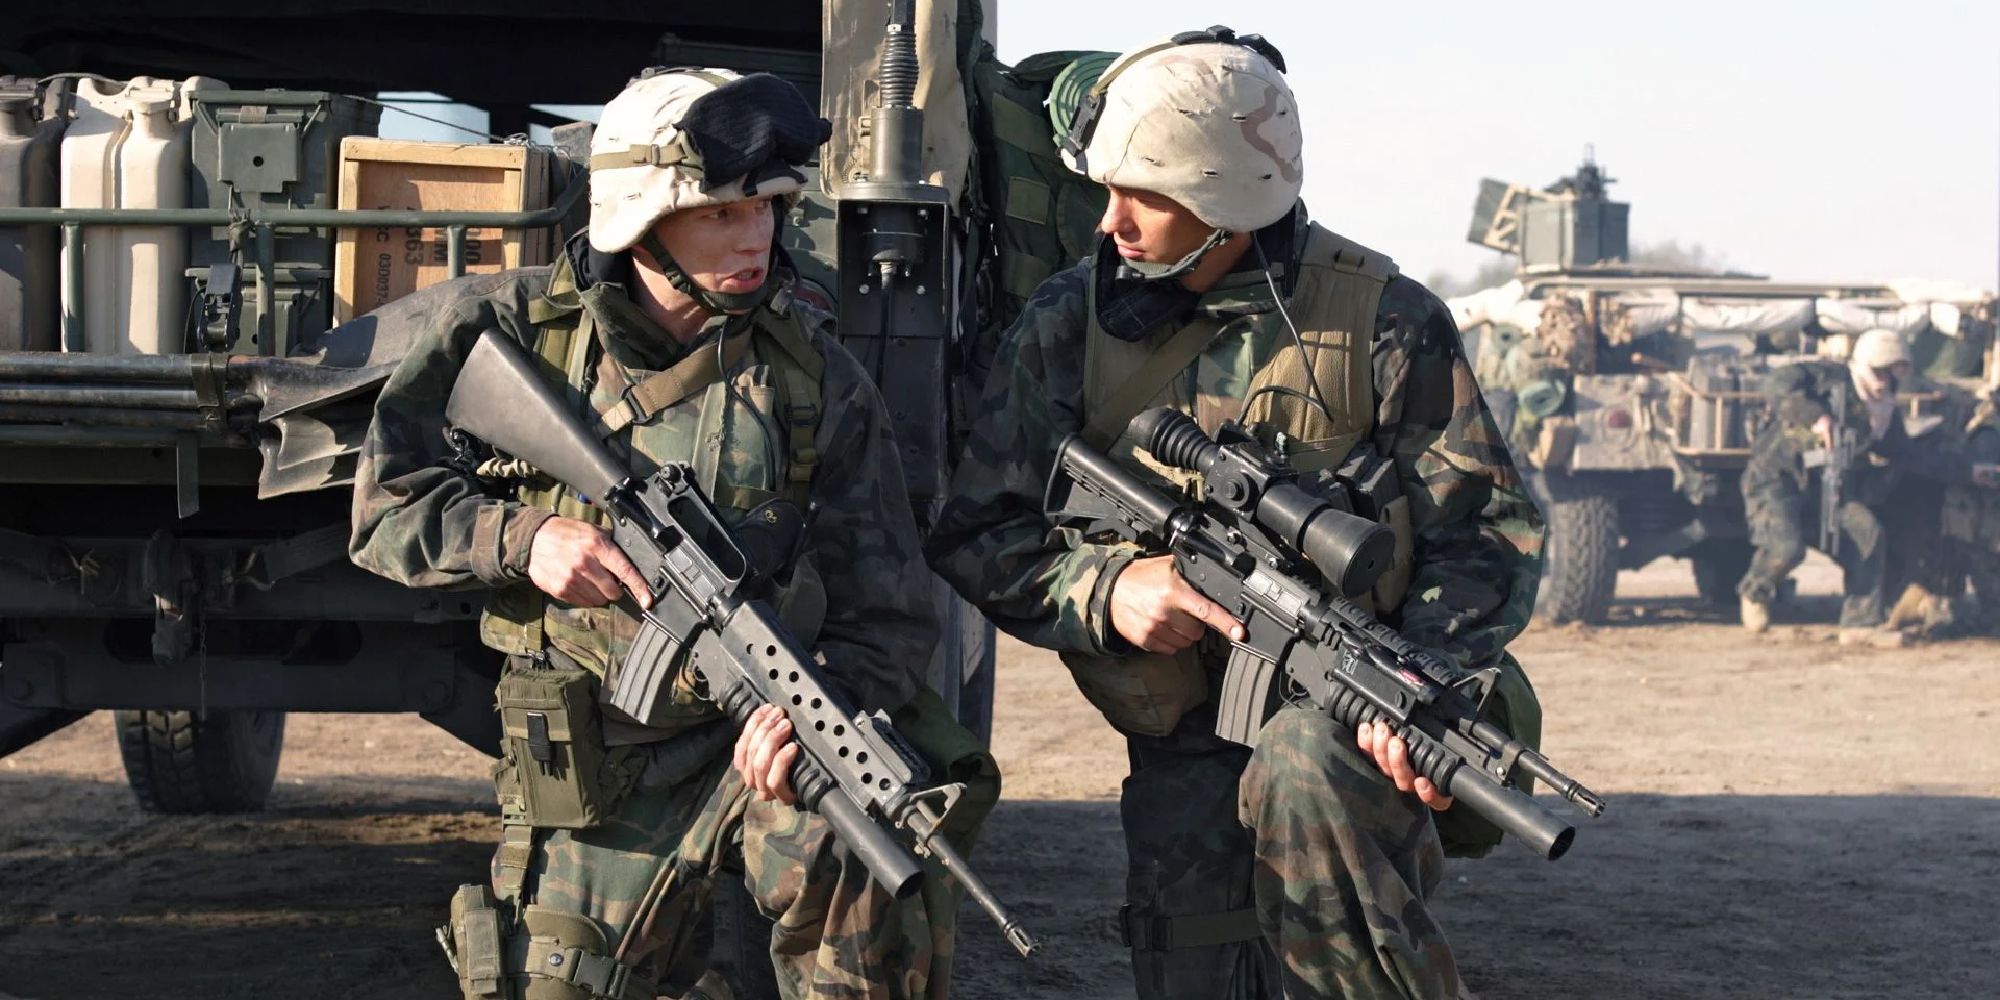 Two soldiers walking while holding guns in Generation Kill - 2008